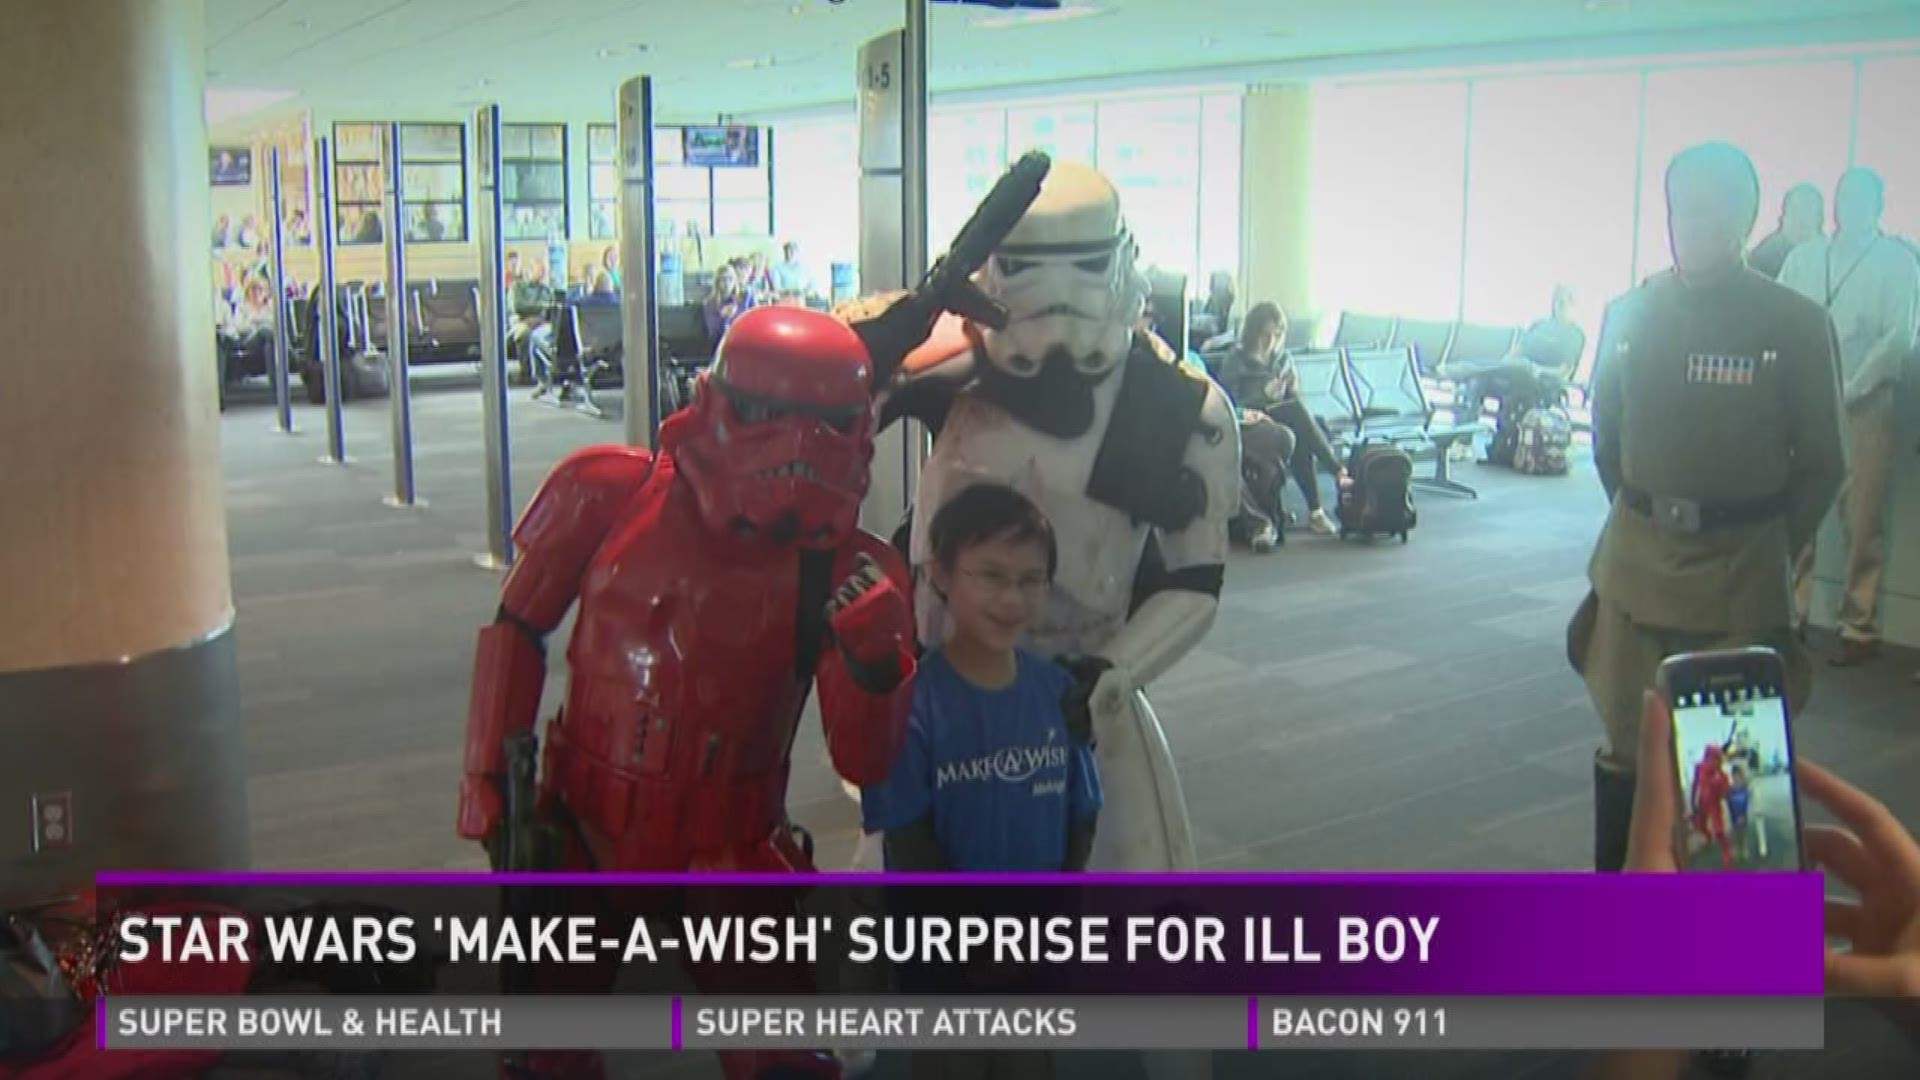 Star Wars 'Make-A-Wish' surprise for ill boy